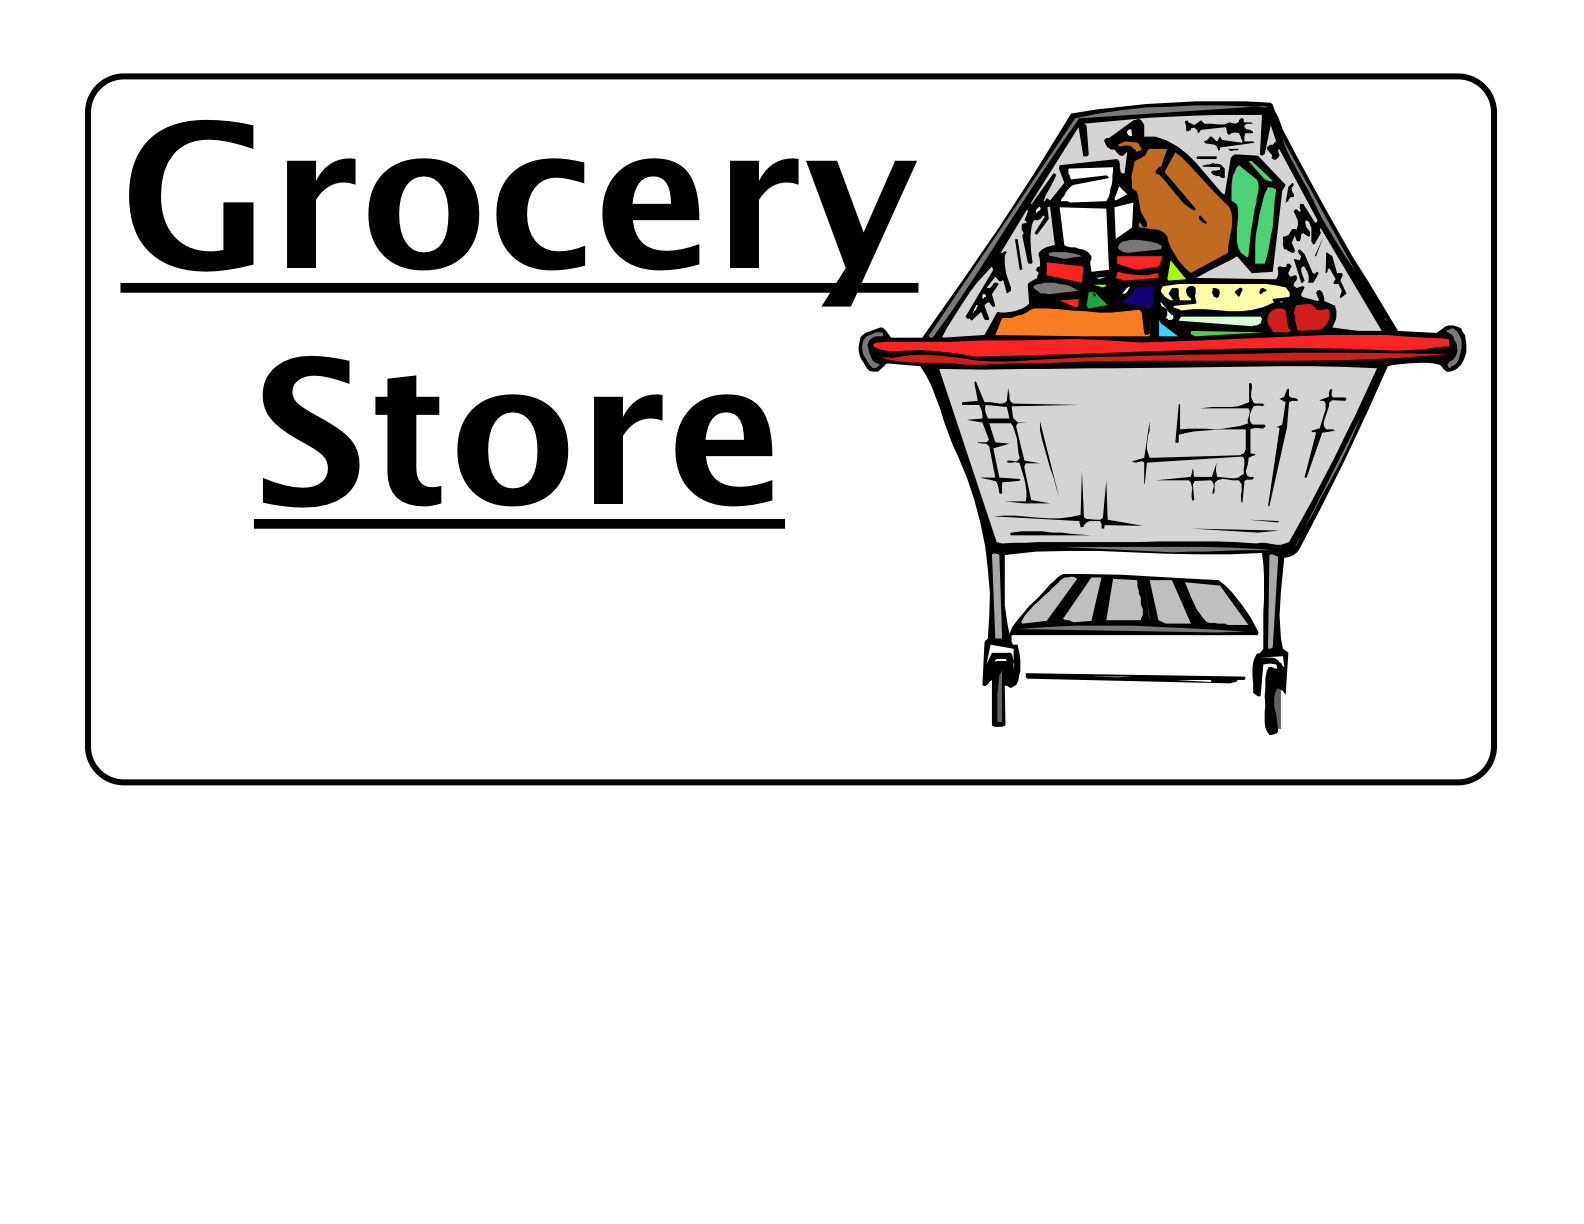 Preschool Is Fun Planning Activities Our Own Grocery Store